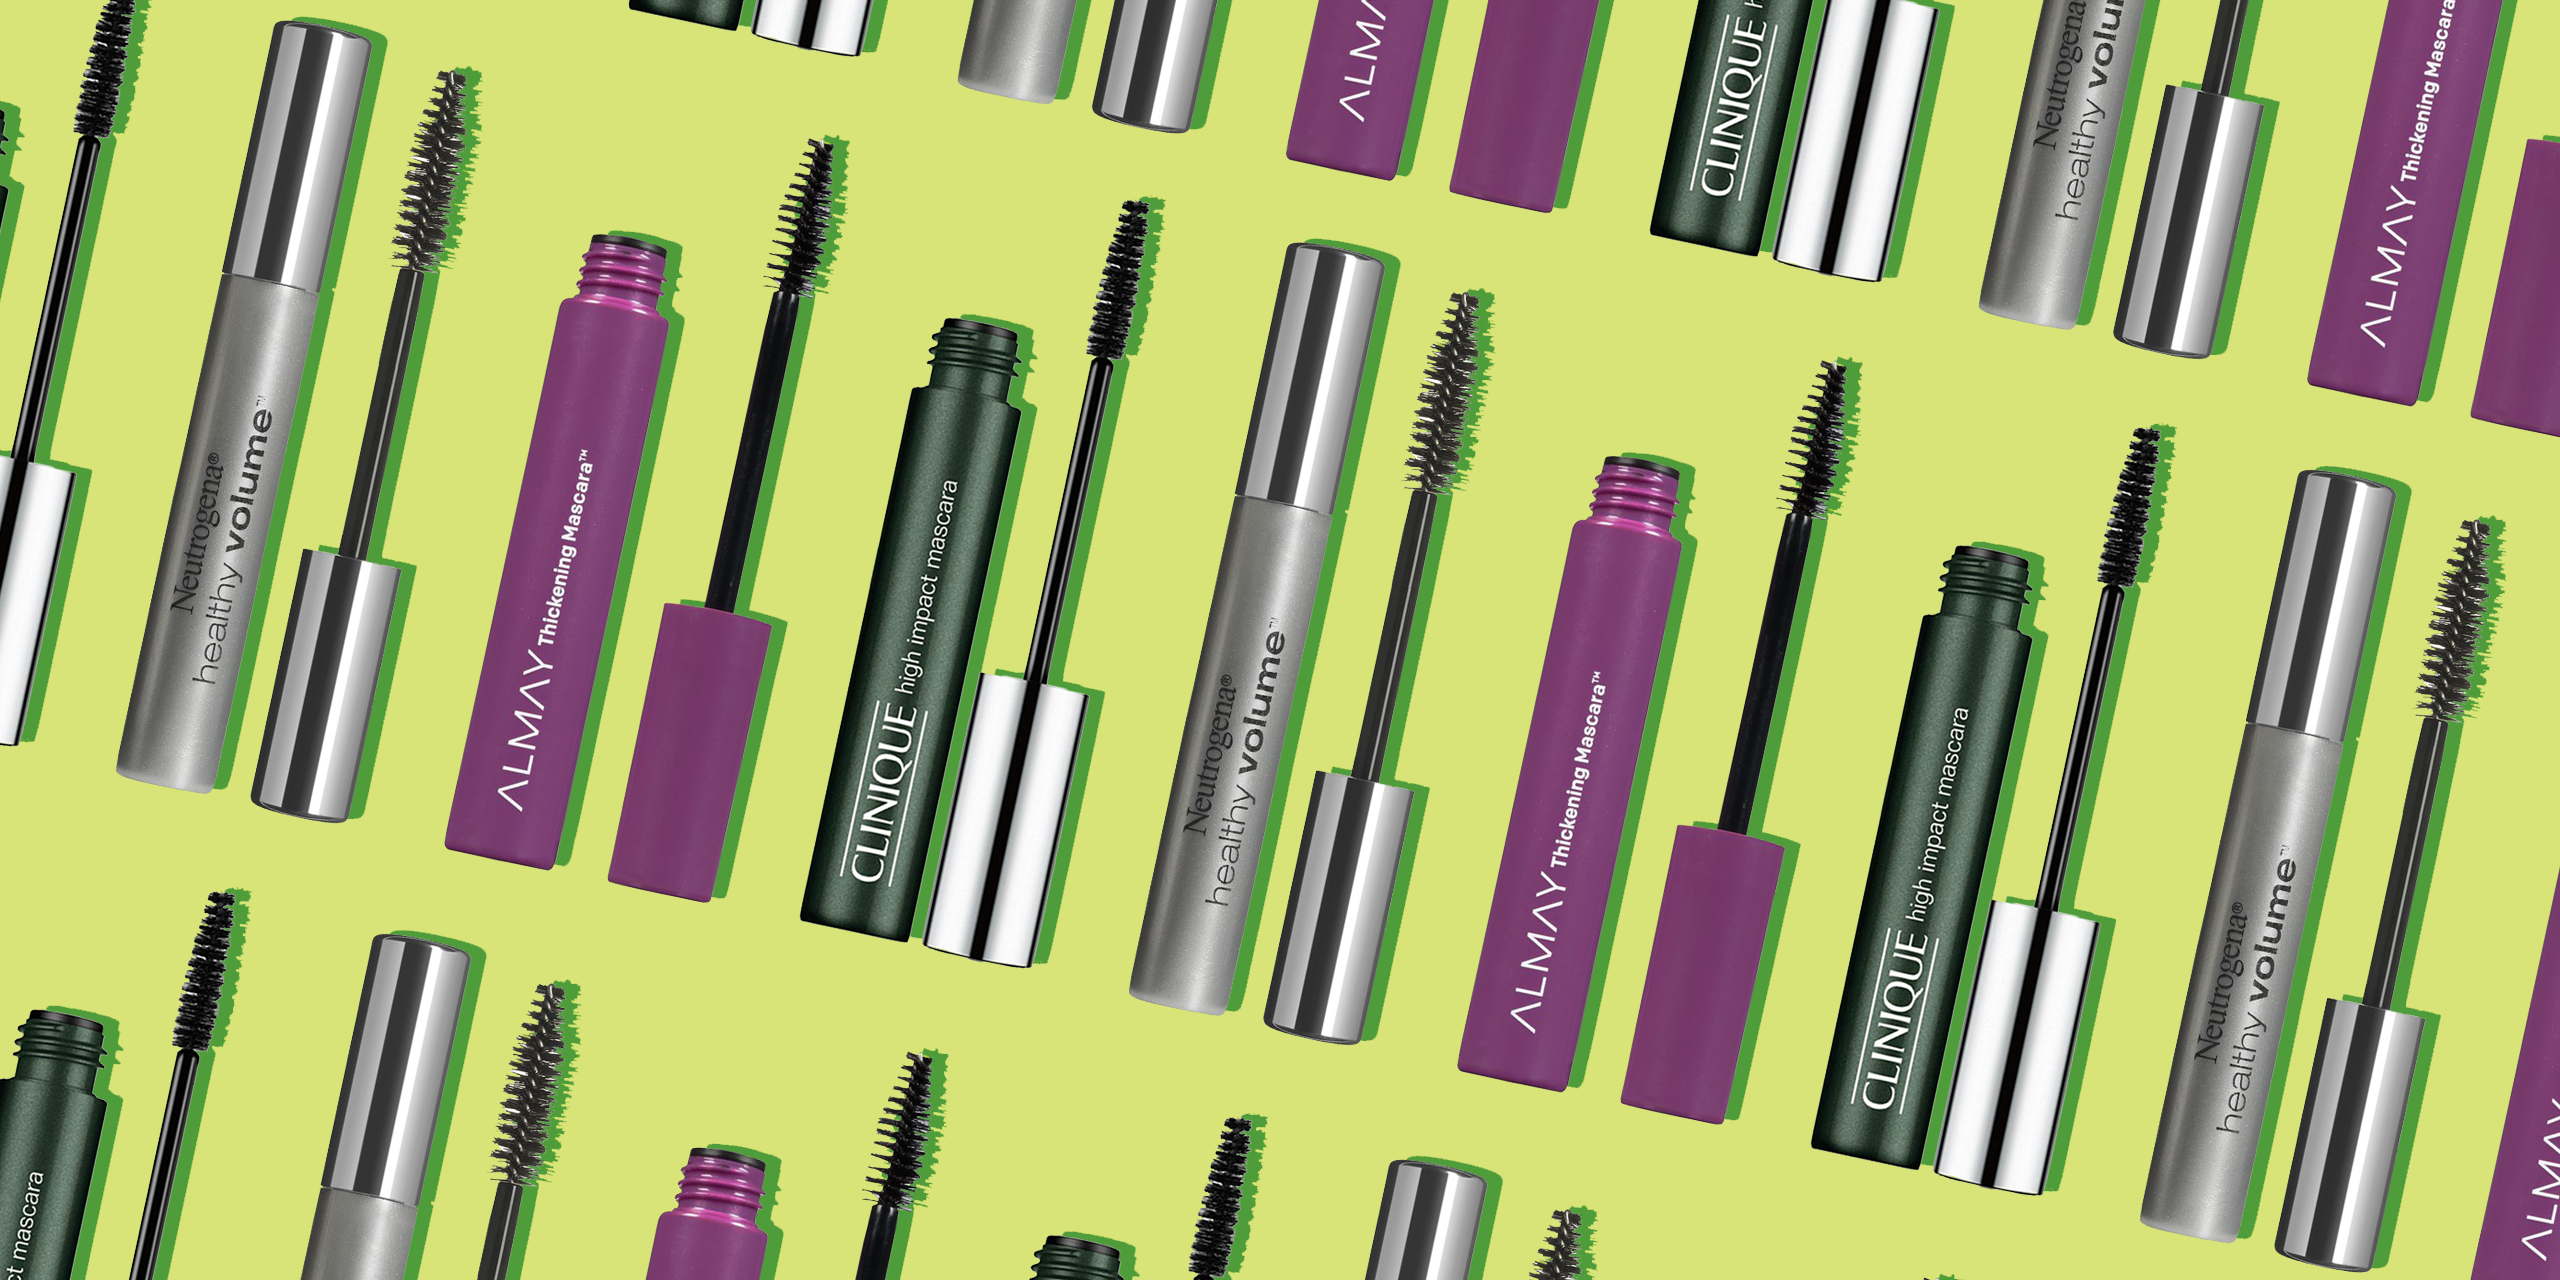 what's the best mascara to use